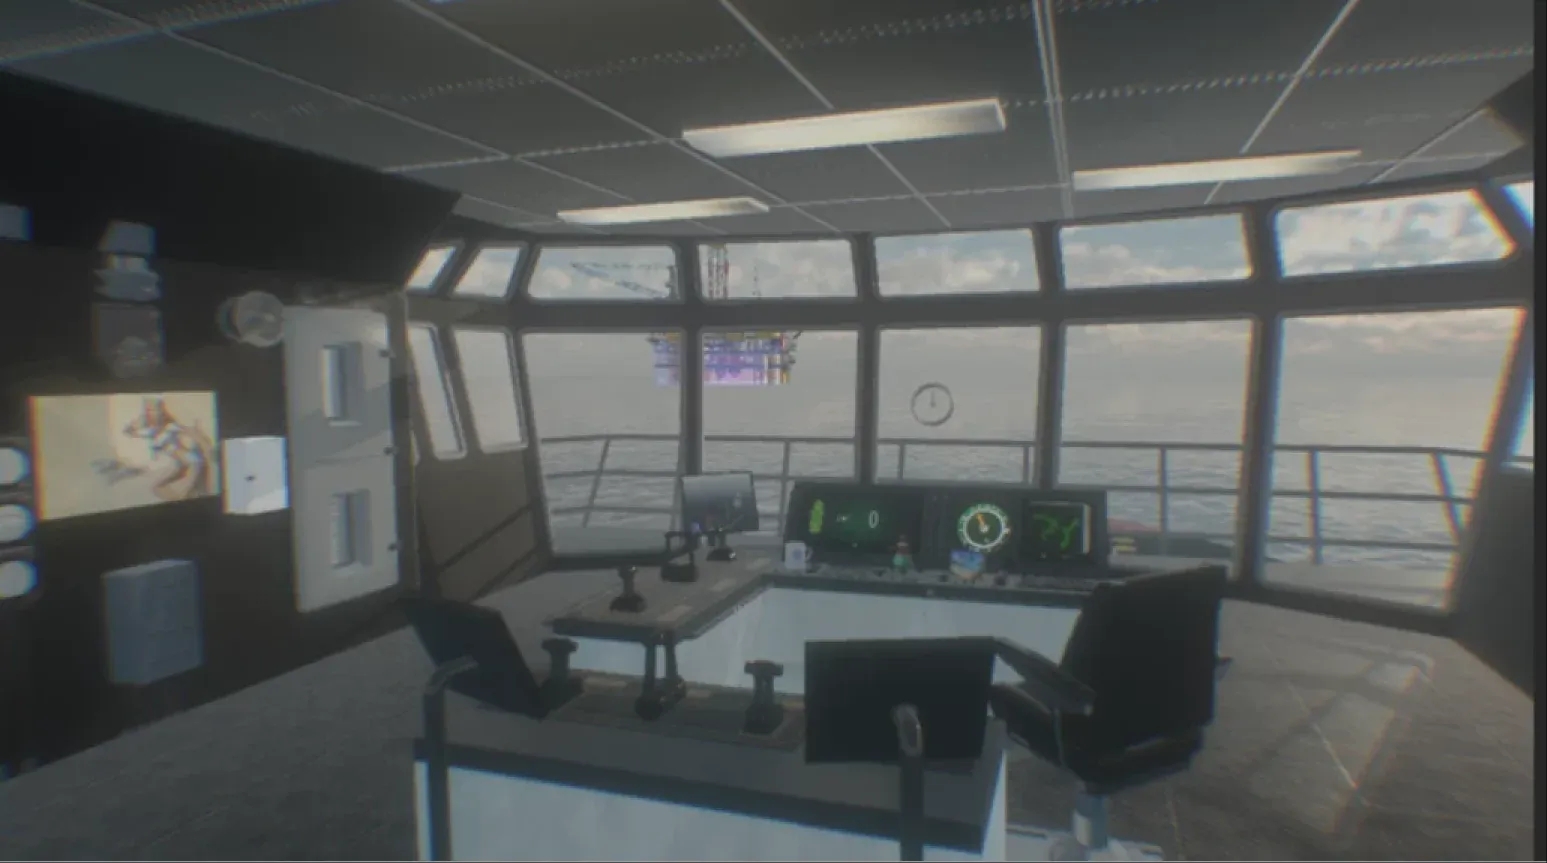 VR maritime simulator made by Onix 